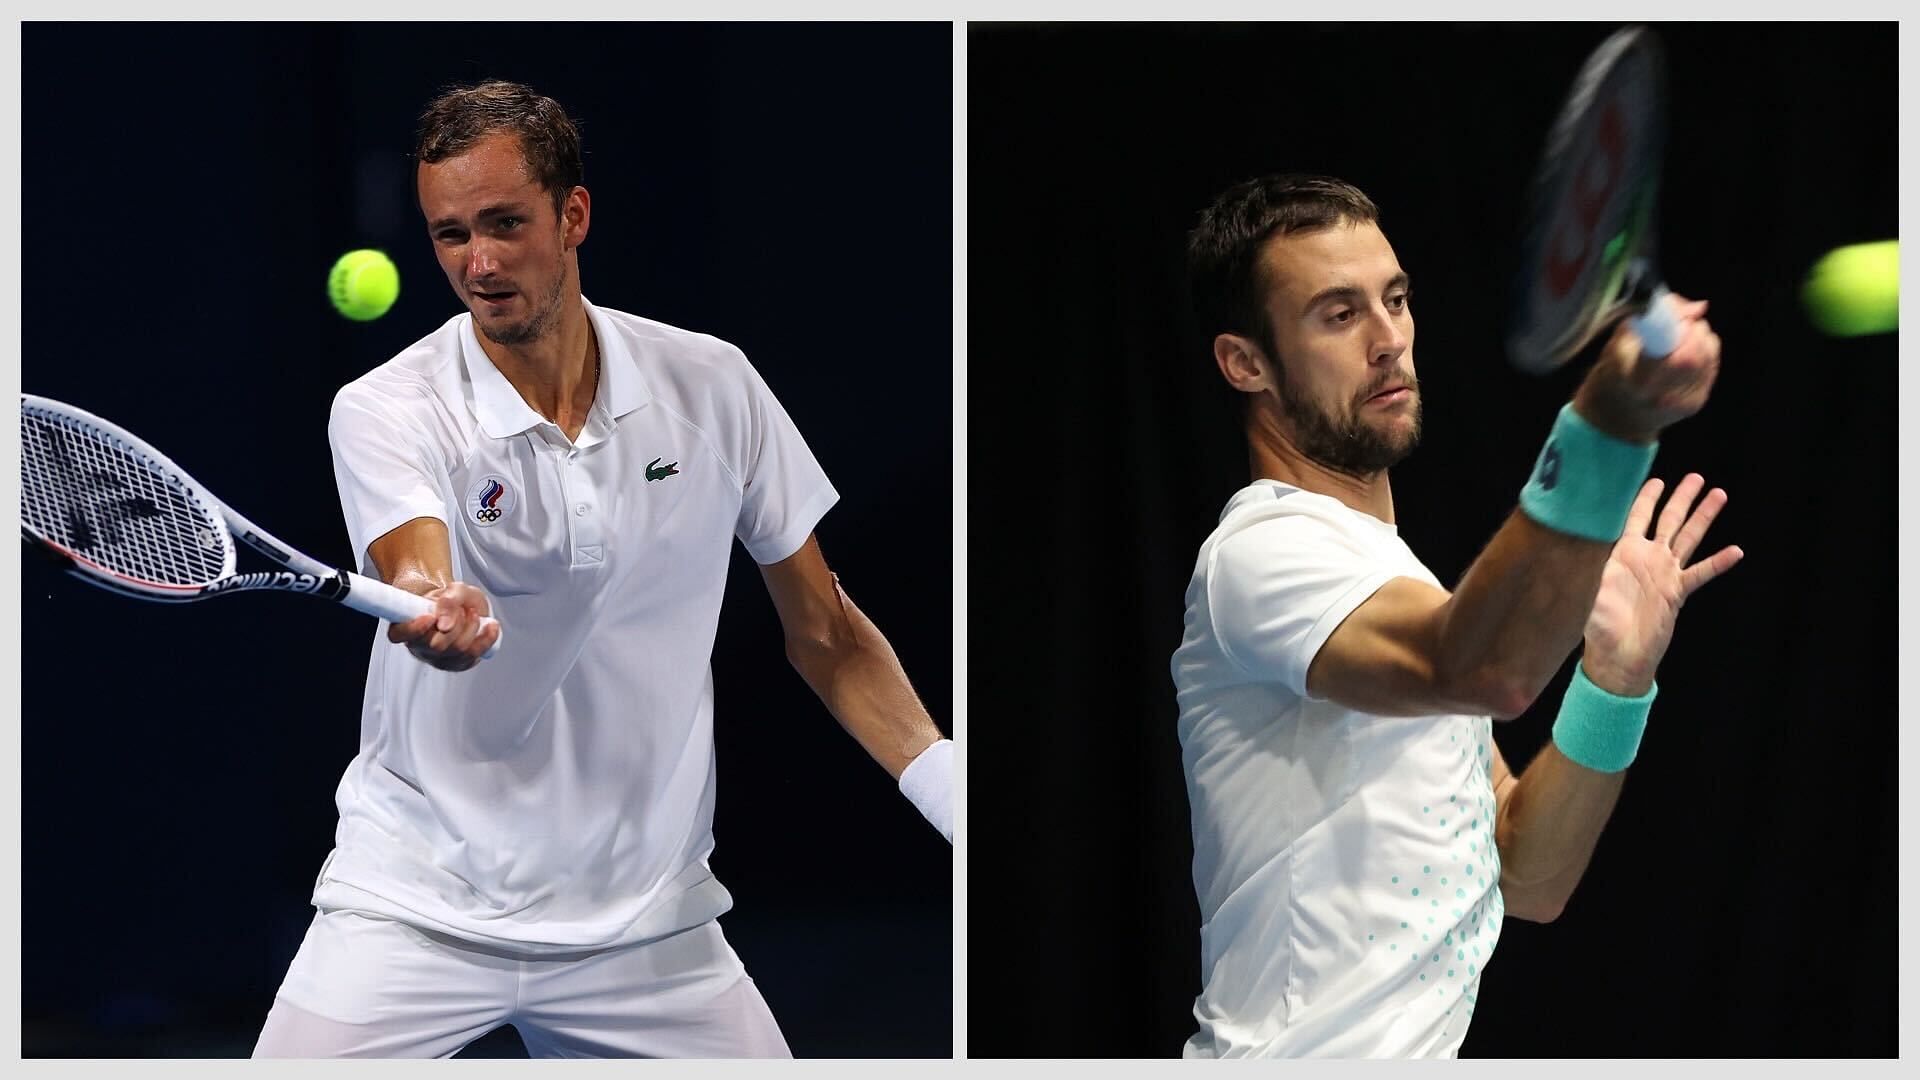 Daniil Medvedev vs Laslo Djere will be one of the second-round matches at Halle.